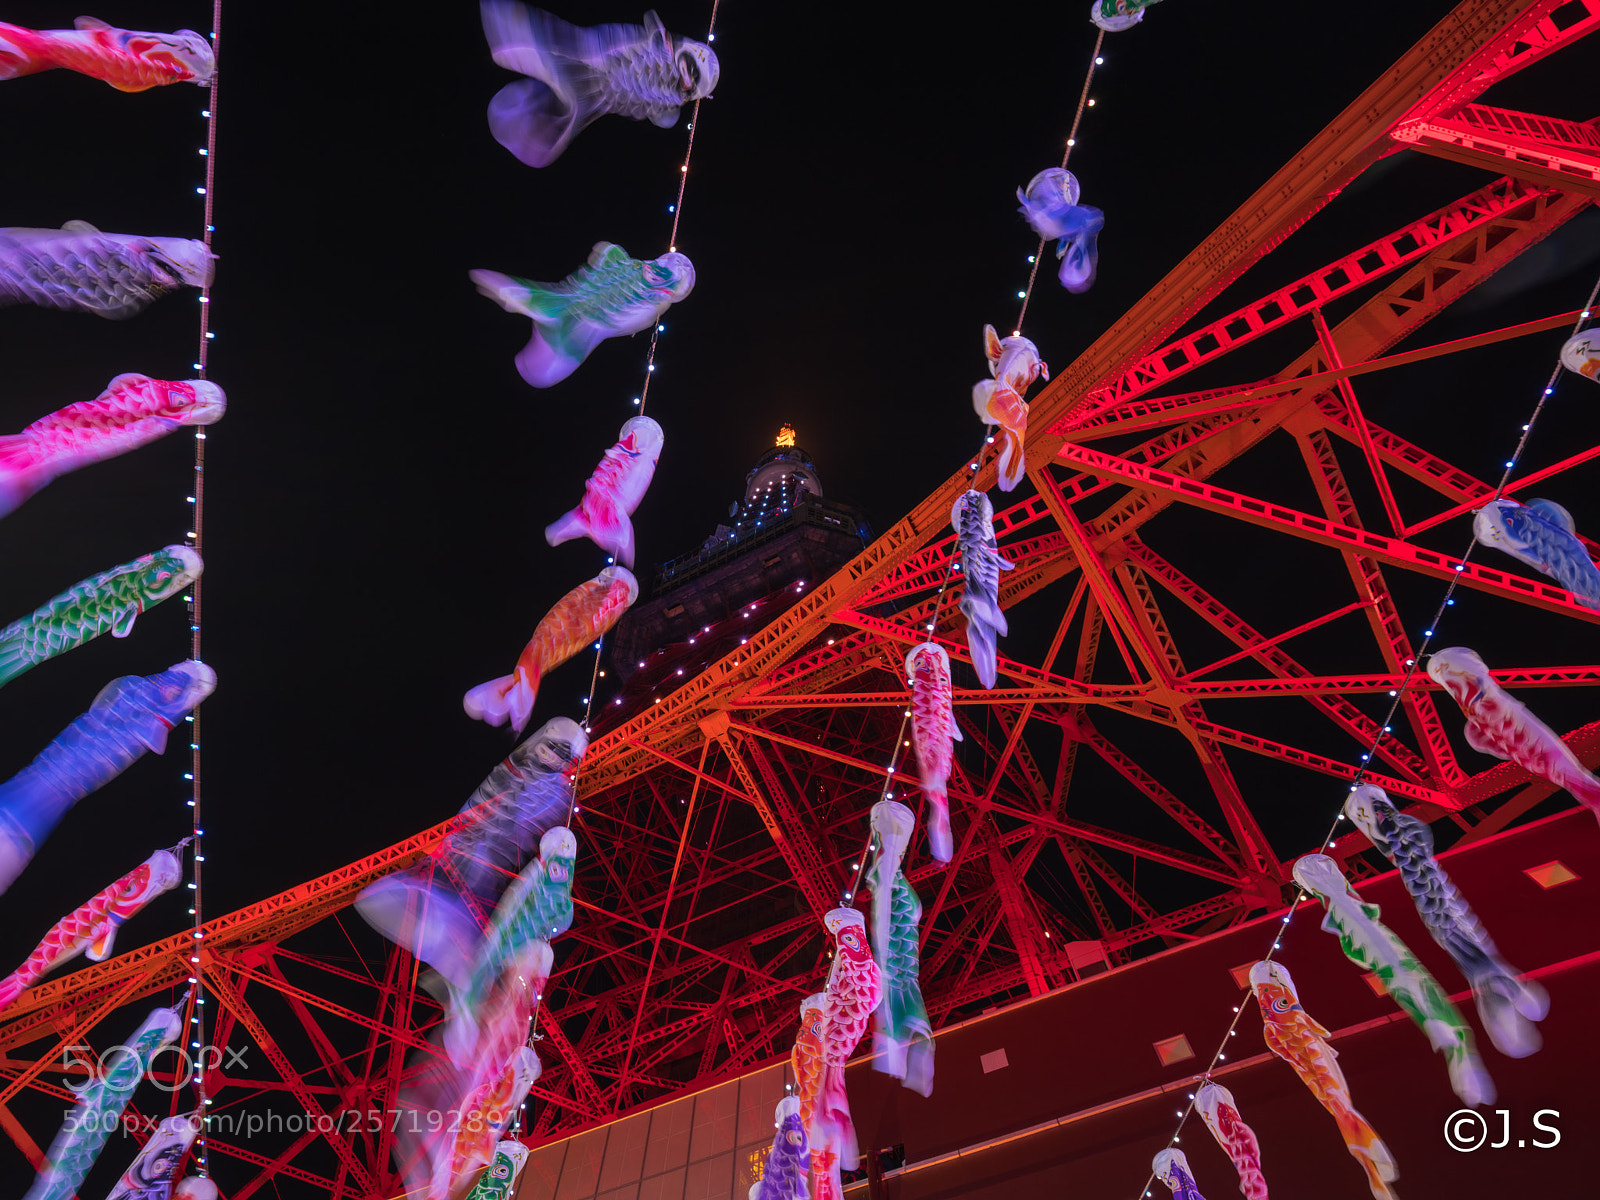 Sony a7R II sample photo. Carp streamer in the photography